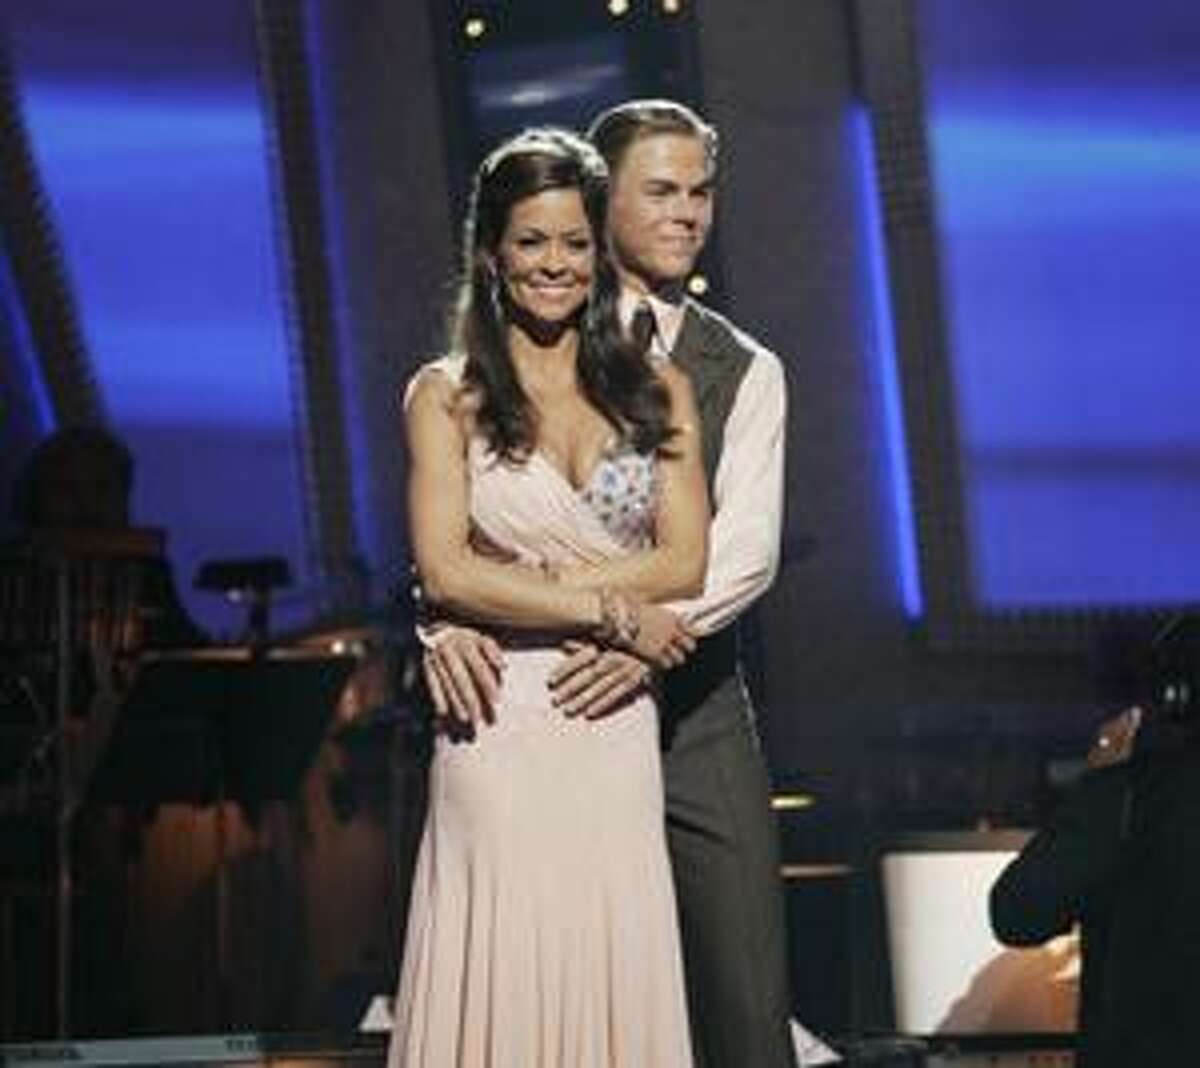 In this image provided by ABC-TV Brooke Burke and her partner Derek Hough are shown Tuesday Nov. 25, 2008. Burke waltzed away with the mirror ball trophy on the "Dancing with the Stars" finale. The 37-year-old TV personality and mother of four dominated the seventh season of the popular ABC dancing competition and bested former NFL player Warren Sapp and former 'NSync member Lance Bass during the Tuesday night finale, in which she reprised an emotional Viennese waltz routine that earned her a perfect score from the show's panel of judges. (AP Photo/ABC - KELSEY MCNEAL) BROOKE BURKE, DEREK HOUGH